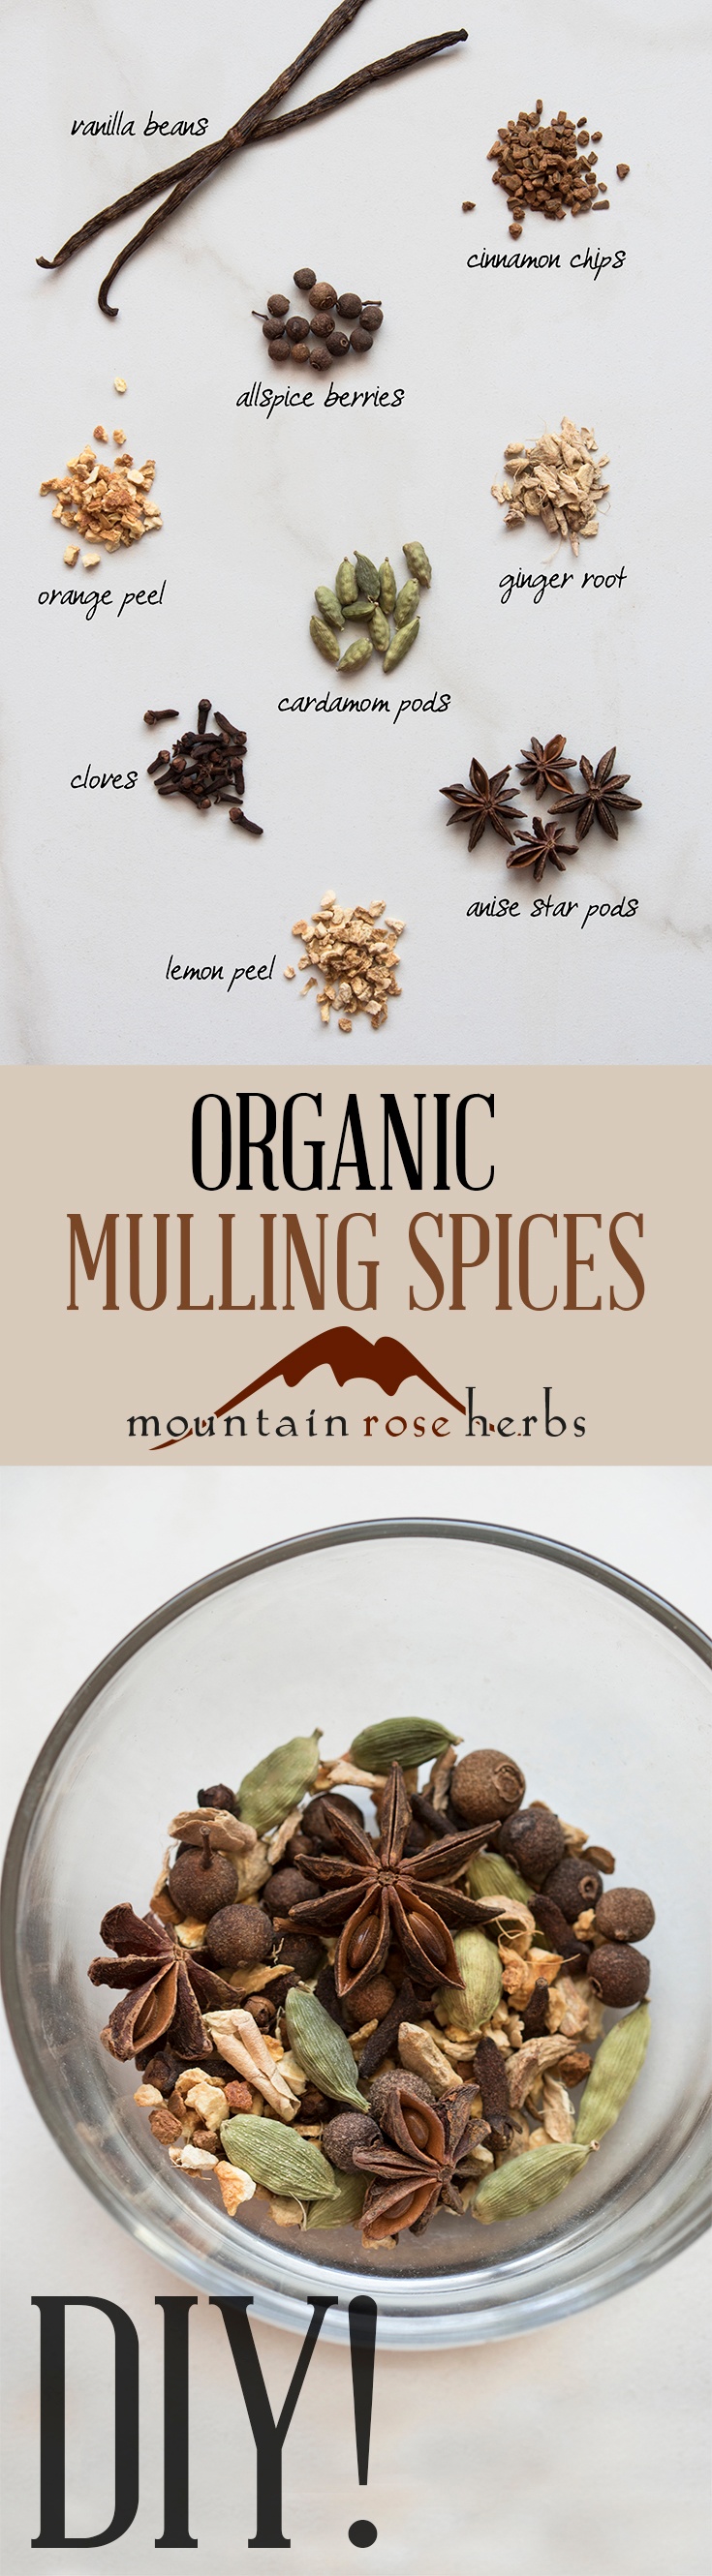 Mulling Spice Recipe by Mountain Rose Herbs